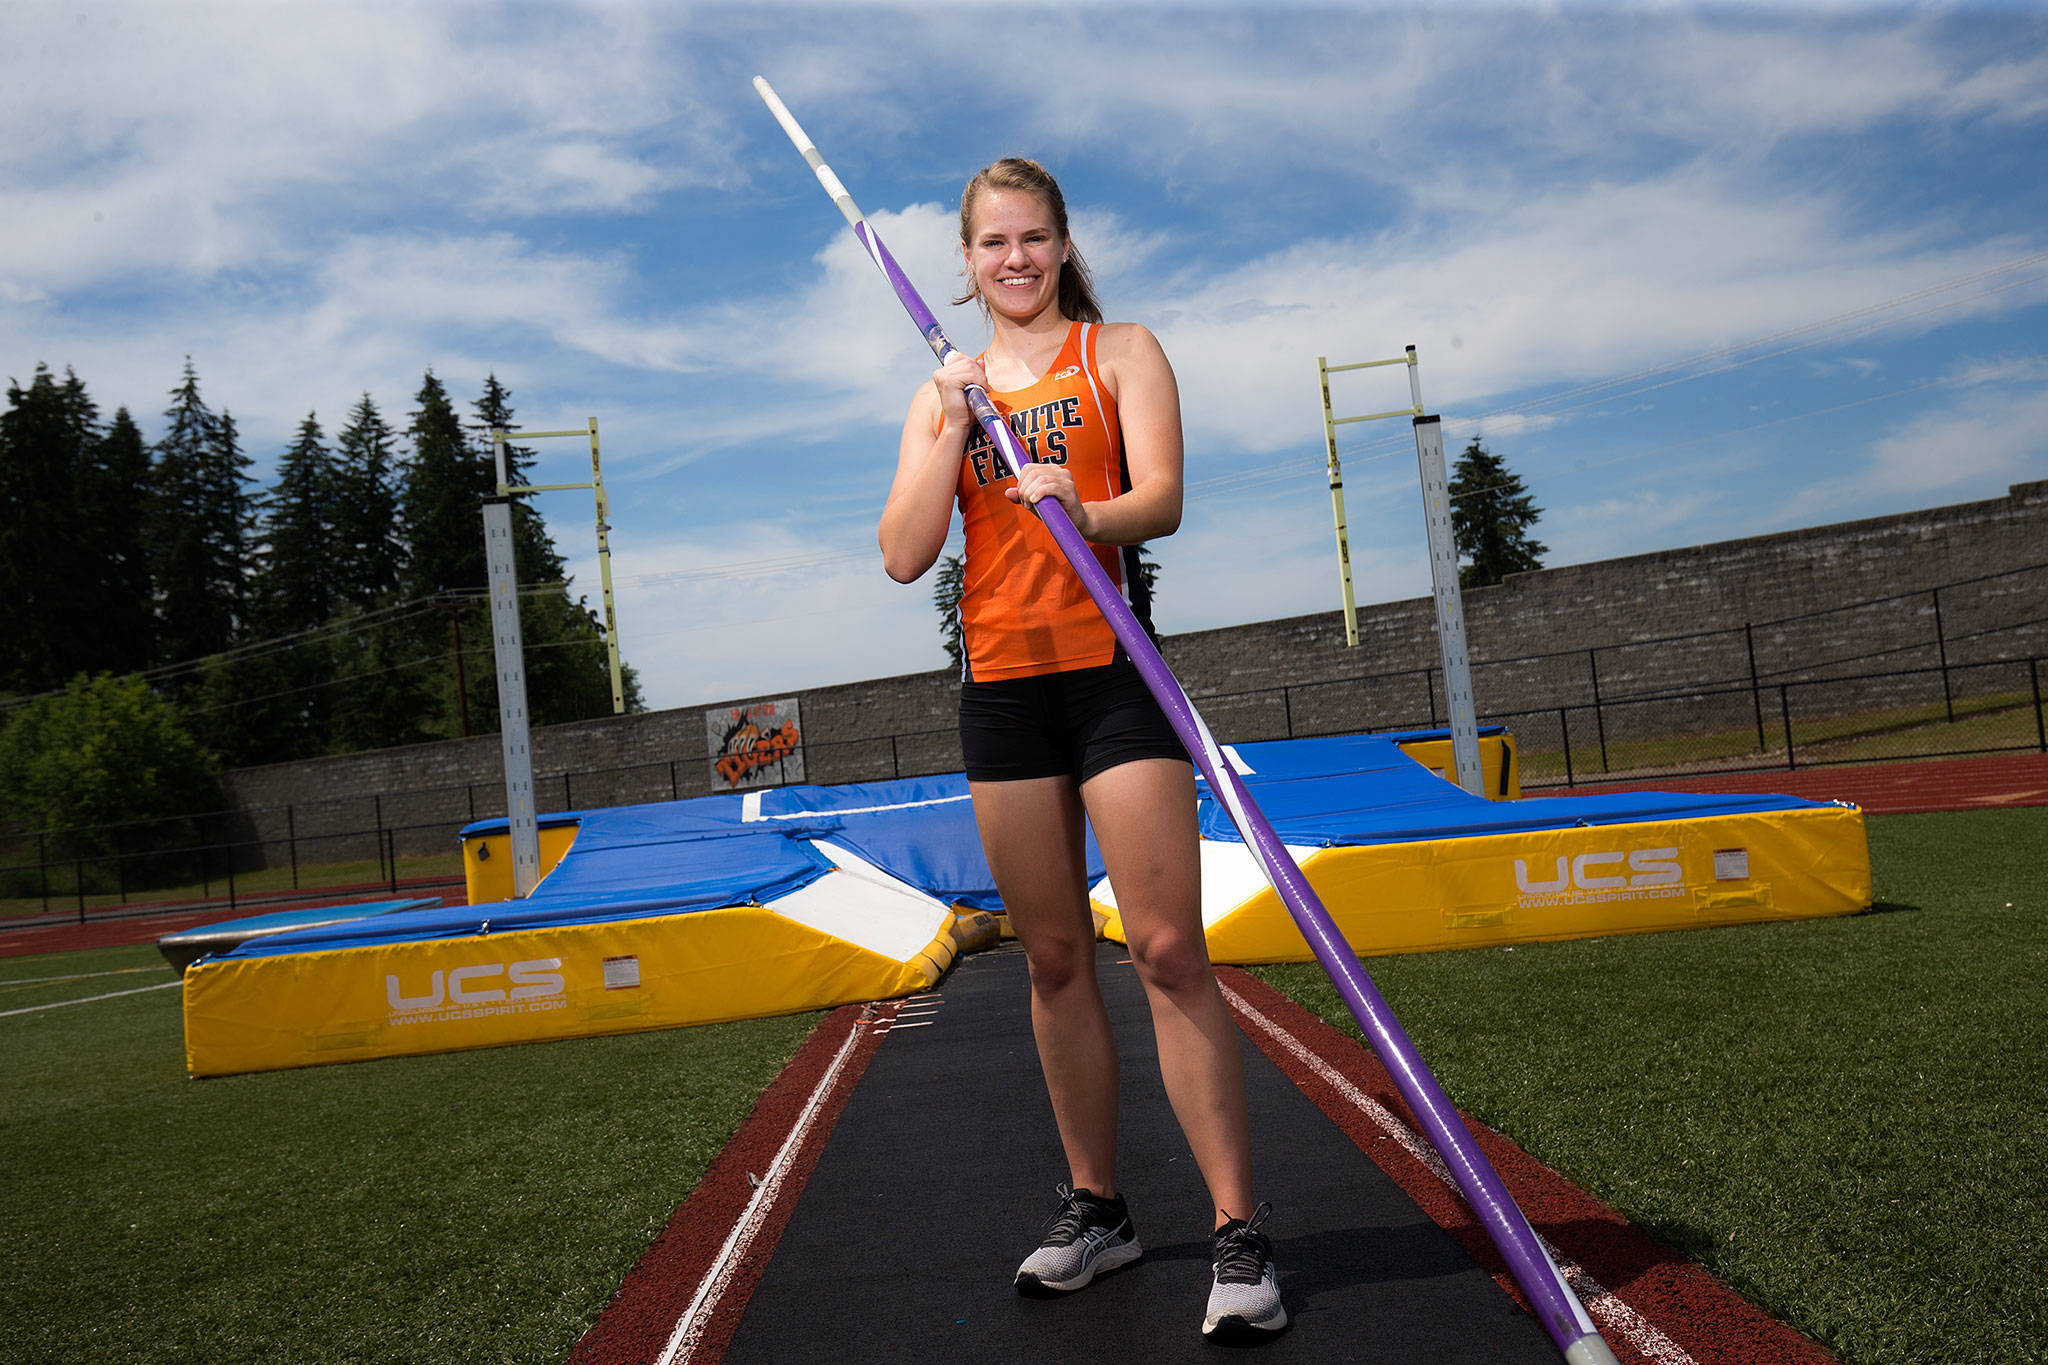 Granite Falls senior Kelsey Bassett won the pole vault event at the 2A state track and field meet last month with a jump of 12 feet, 6 inches. (Andy Bronson / The Herald)